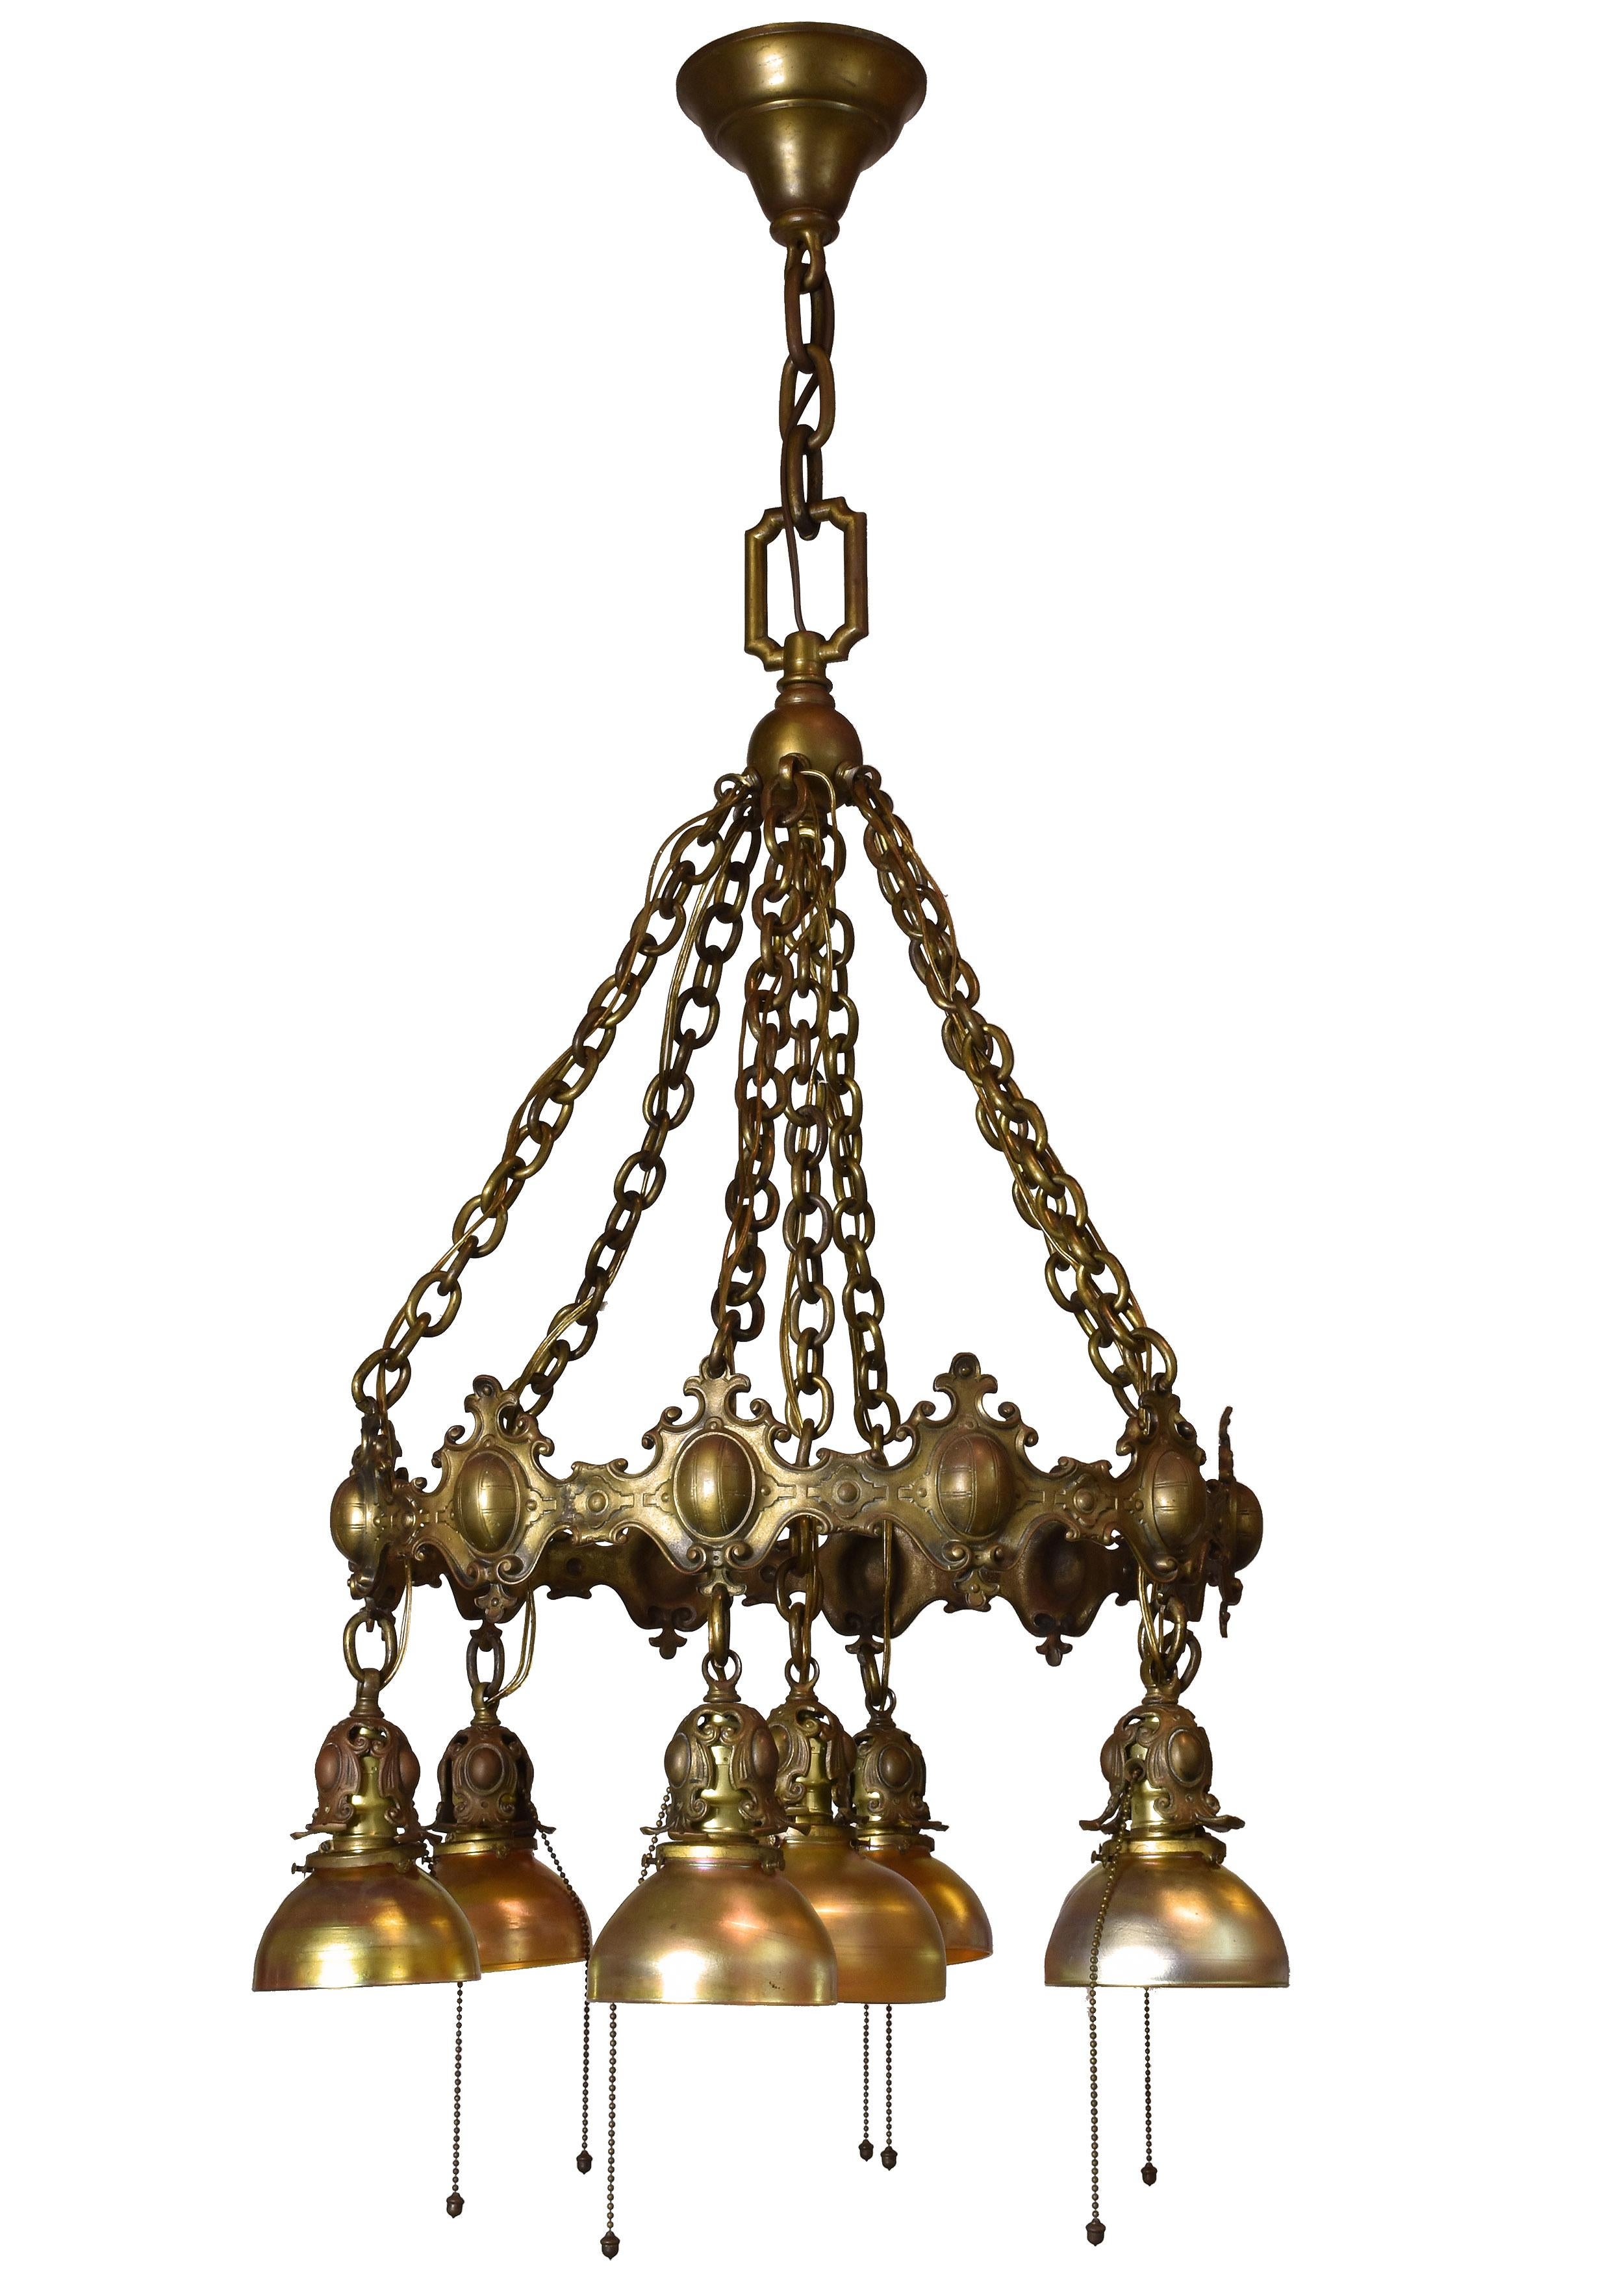 This handsome cast bronze chandelier is intricately crafted and eye-catching. The cast bronze body is made up of a shield motif with curling edges. Each of the seven shades hangs from sockets covered by leafy socket housing. The chains of the body